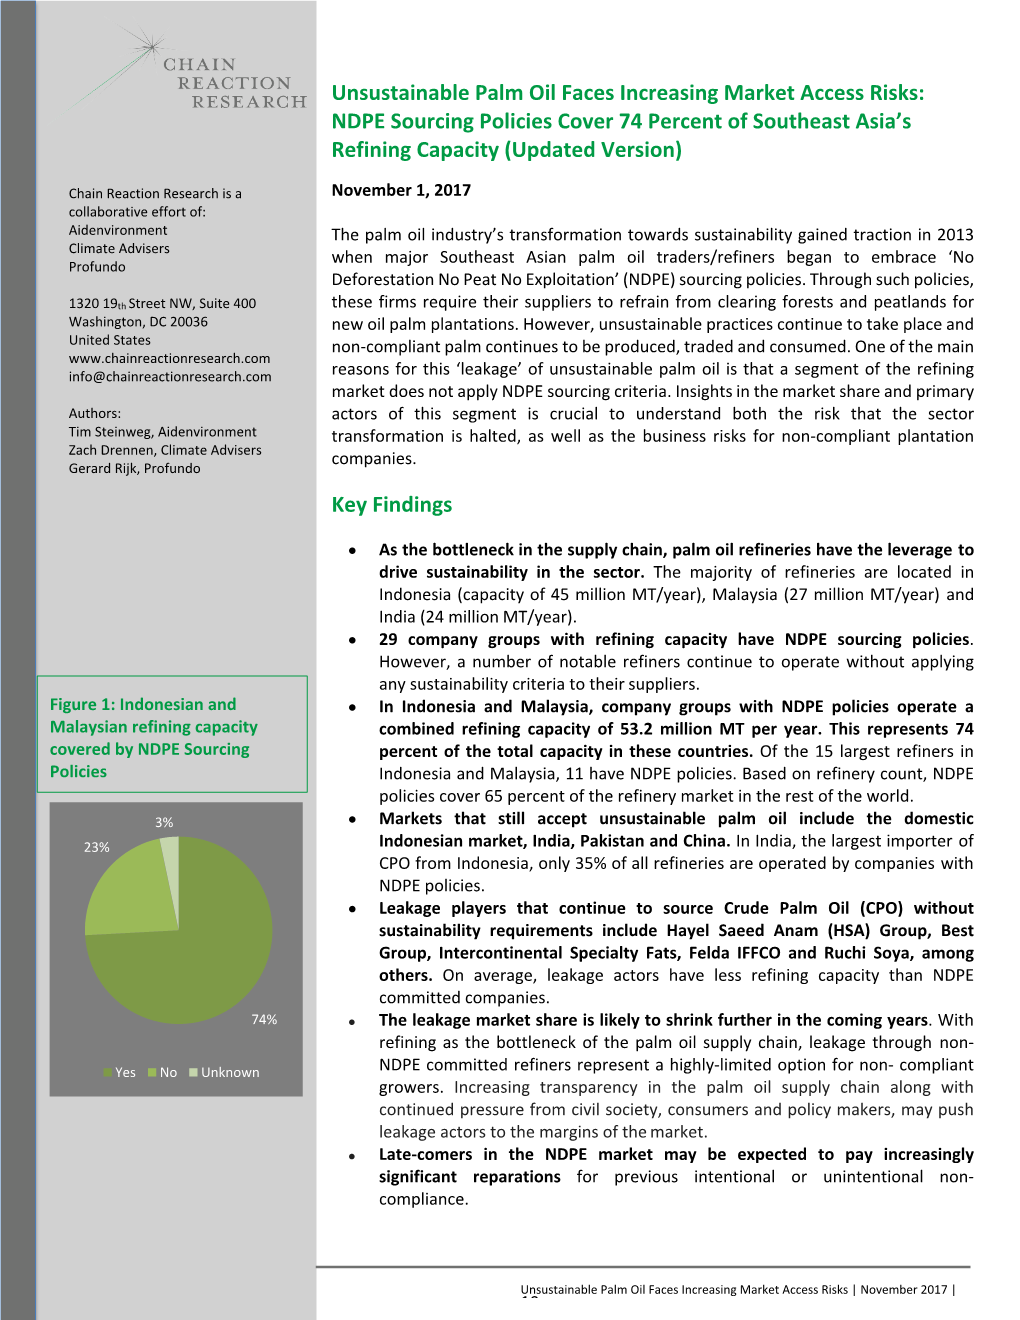 Unsustainable Palm Oil Faces Increasing Market Access Risks: NDPE Sourcing Policies Cover 74 Percent of Southeast Asia’S Refining Capacity (Updated Version)